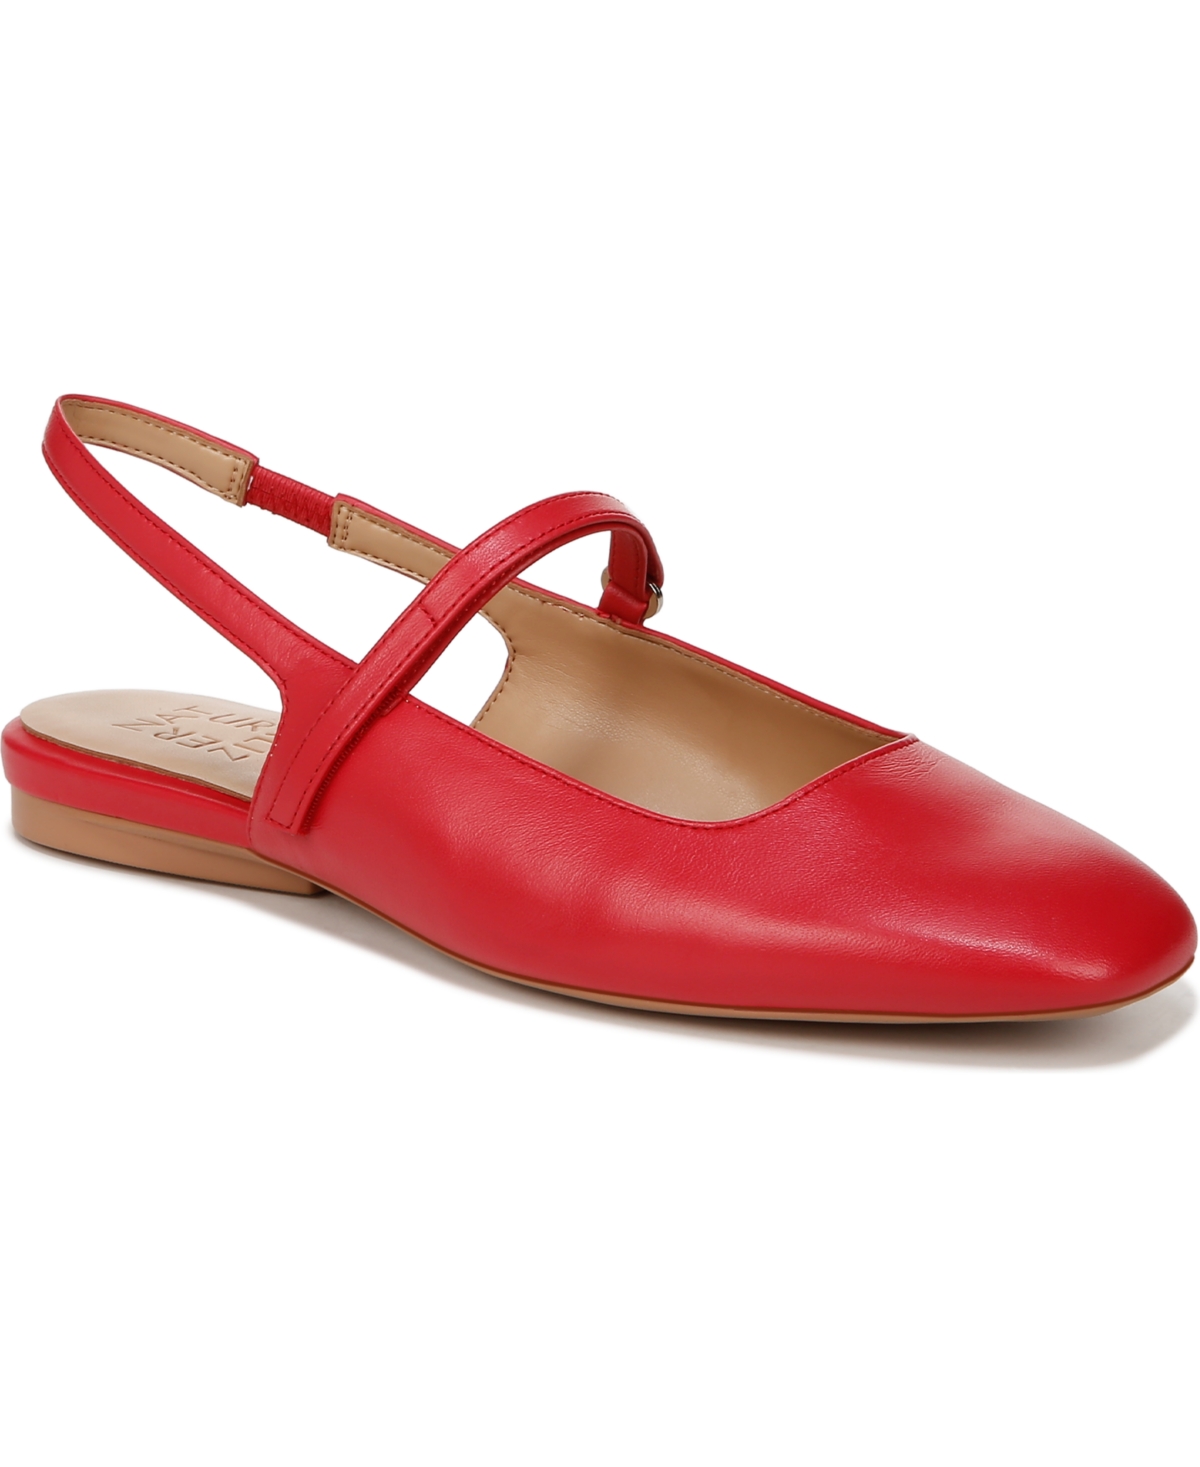 Naturalizer Connie Slingback Flats In Crantini Red Leather